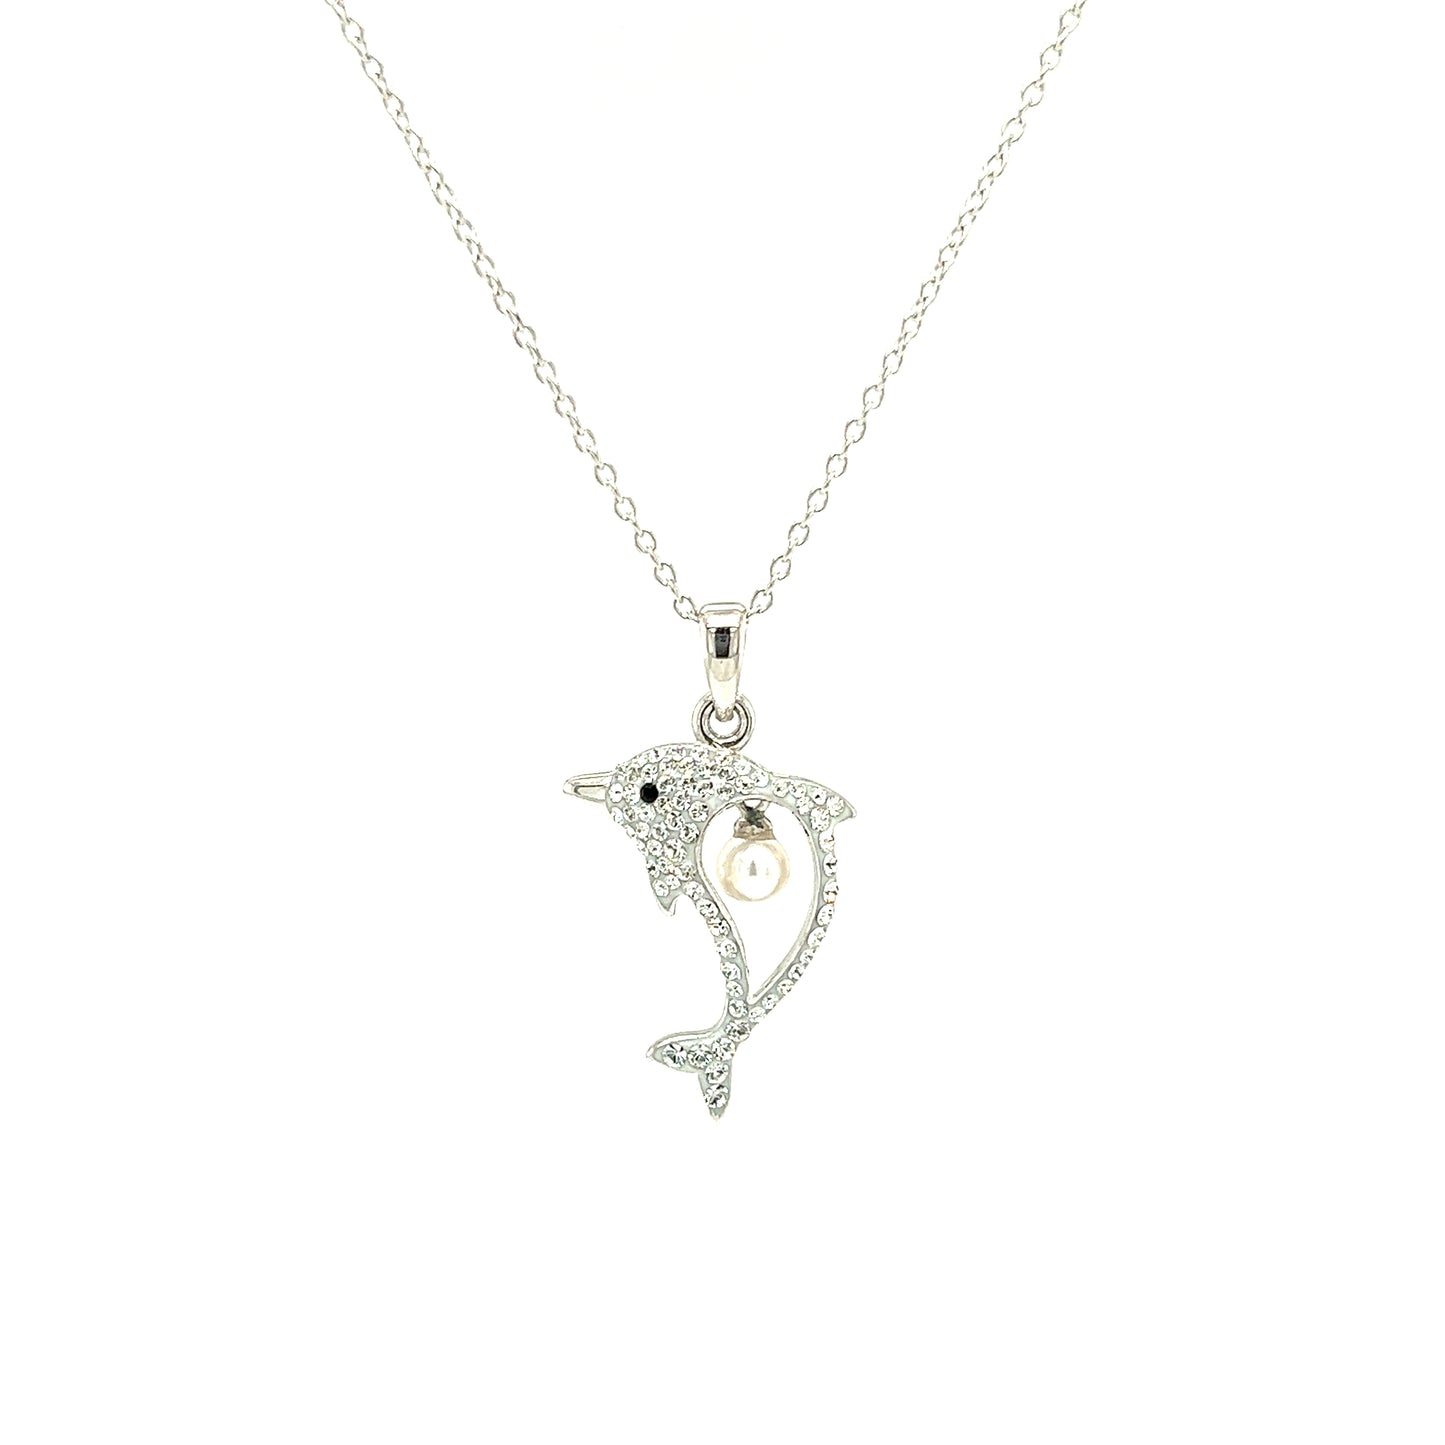 Dolphin Necklace With 4mm White Pearl and White Crystals in Sterling Silver Necklace Front View